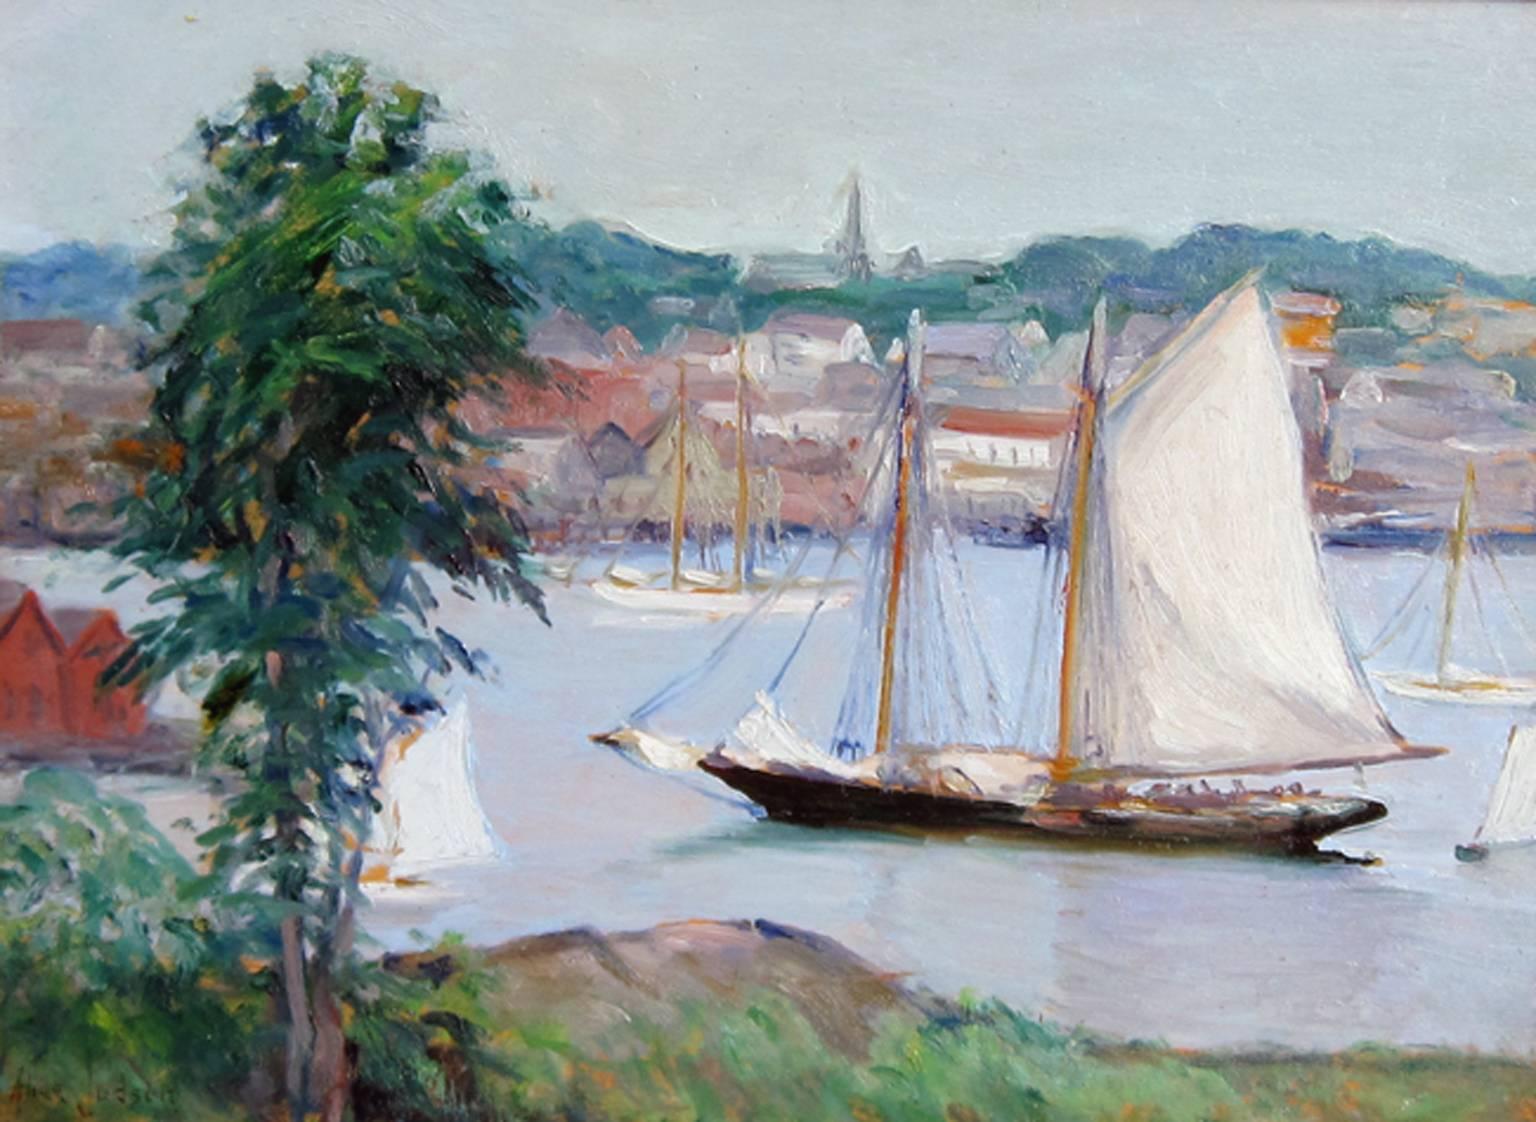 ALICE JUDSON
American, 1876–1948

Schooner at Anchor, Gloucester, Massachusetts

Signed Alice Judson, also titled on a label attached to the reverse
Oil on panel
11½ x 15½ inches (29.2 x 39.2 cm)
Framed: 19½ x 23 inches (49.5 x 58 cm)
